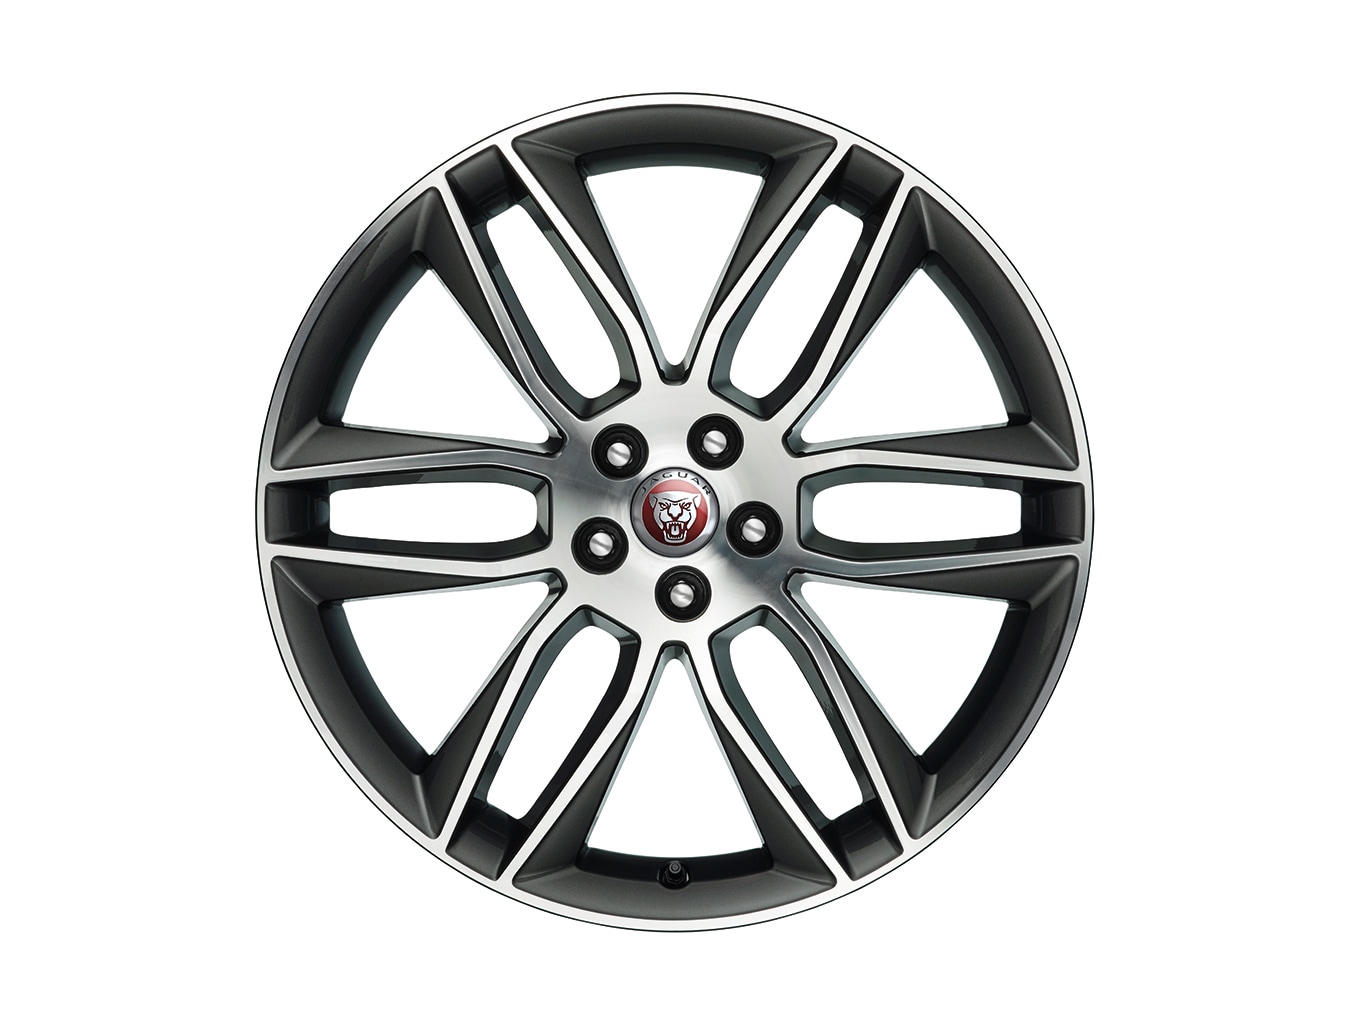 20" Style 6003, Diamond Turned with Dark Grey contrast, front image